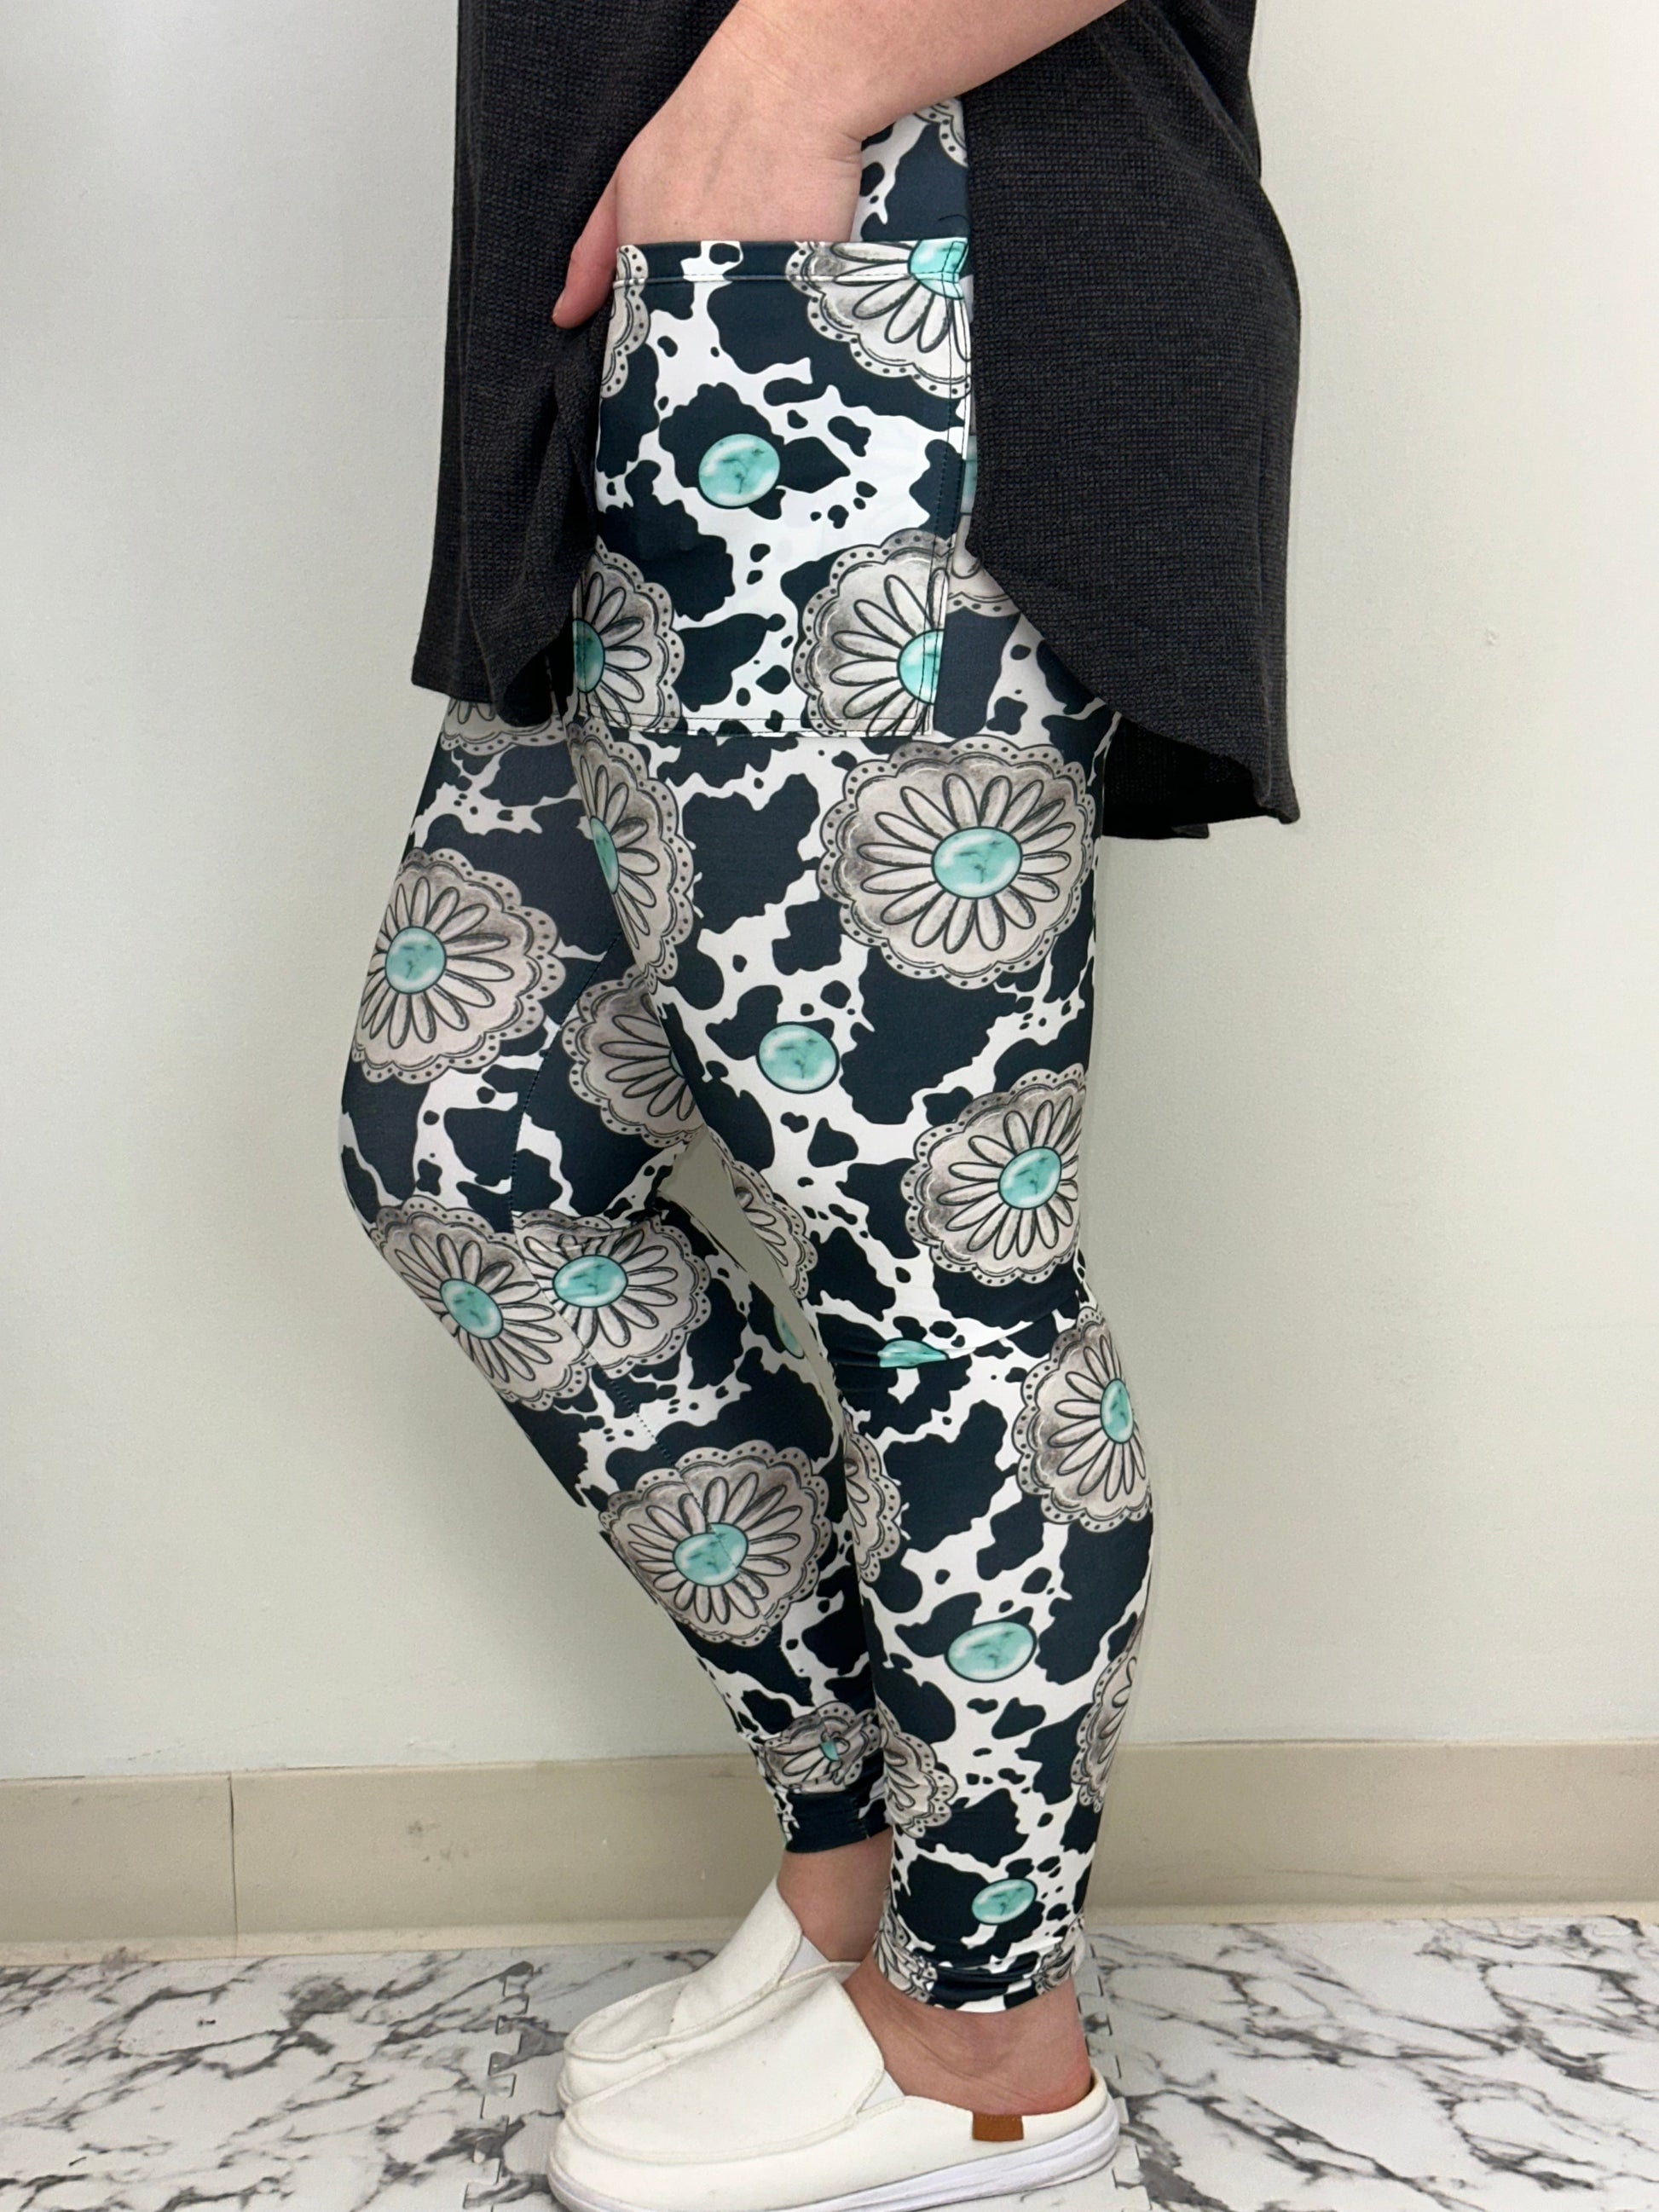 Turquoise Cow Leggings w/ Pockets - Three Bears Boutique